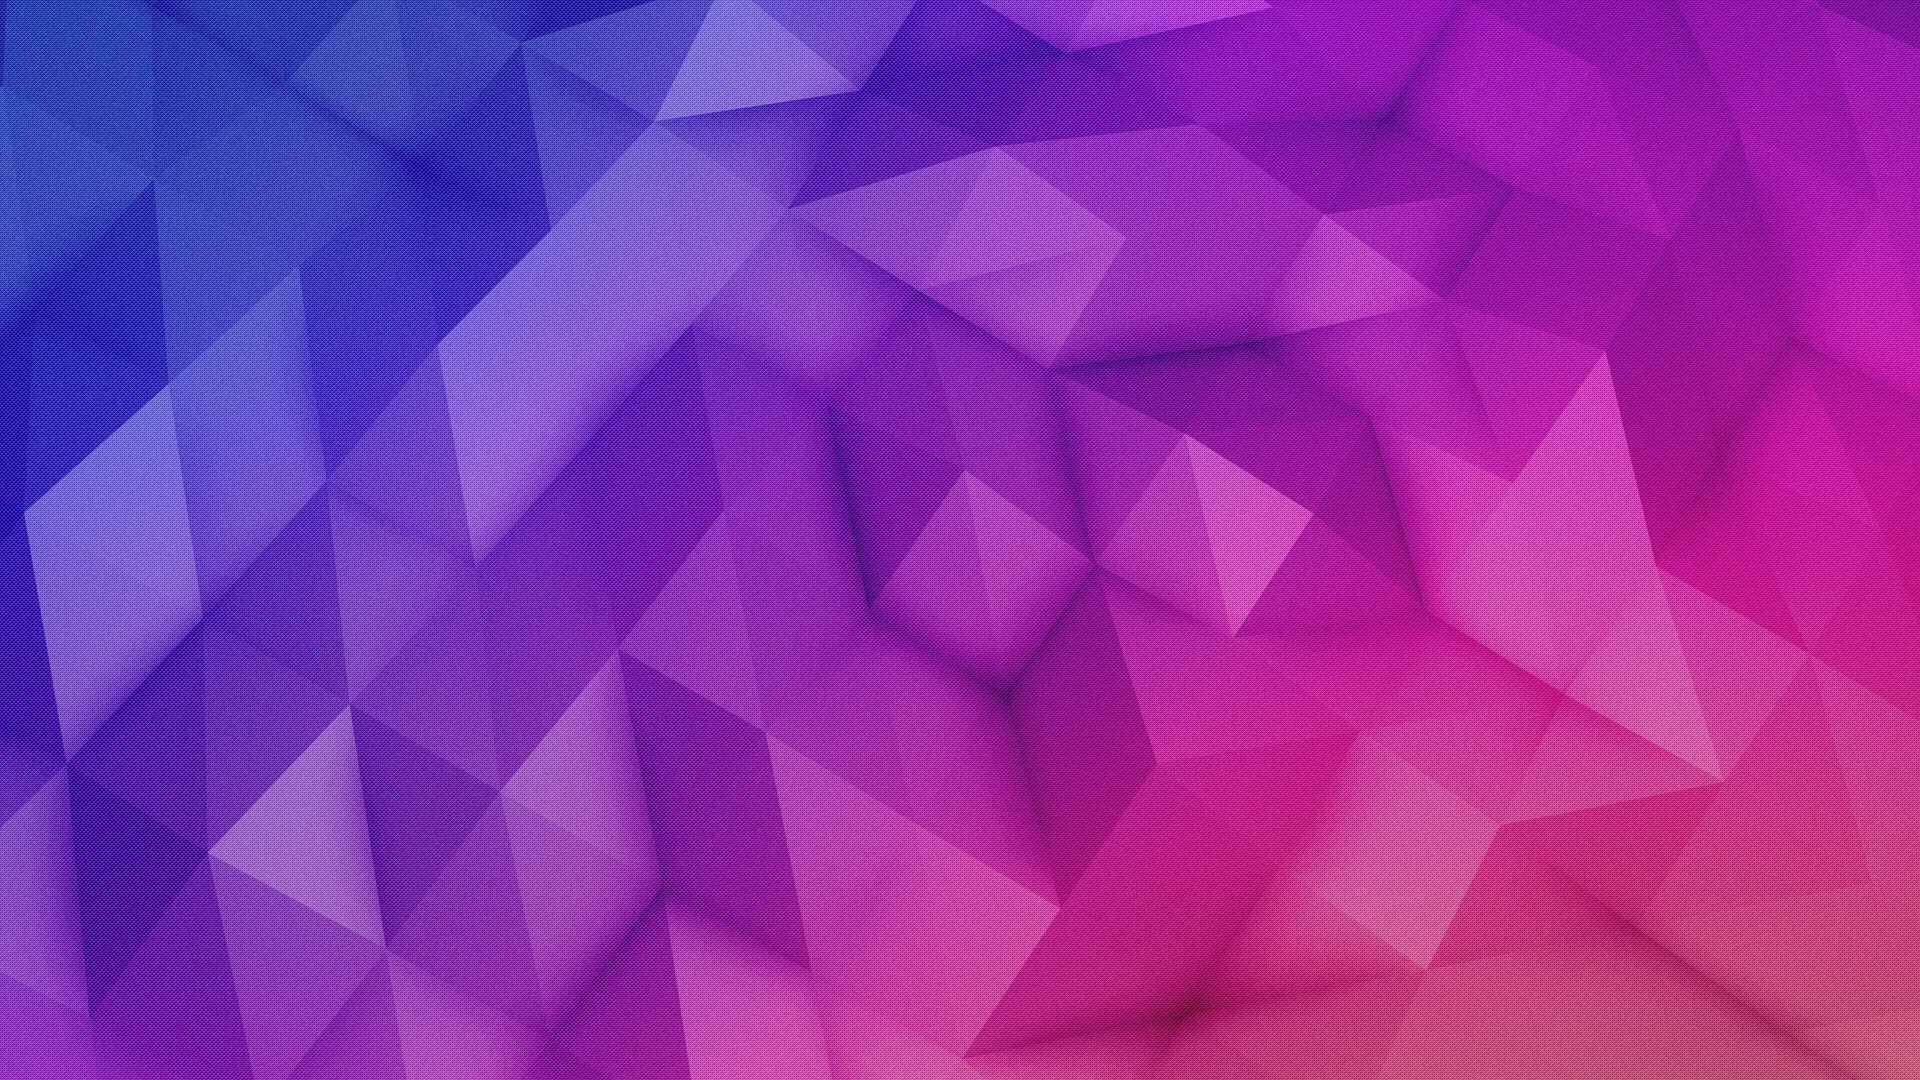 Abstract-Geometric #1 wallpaper – Wallpapers